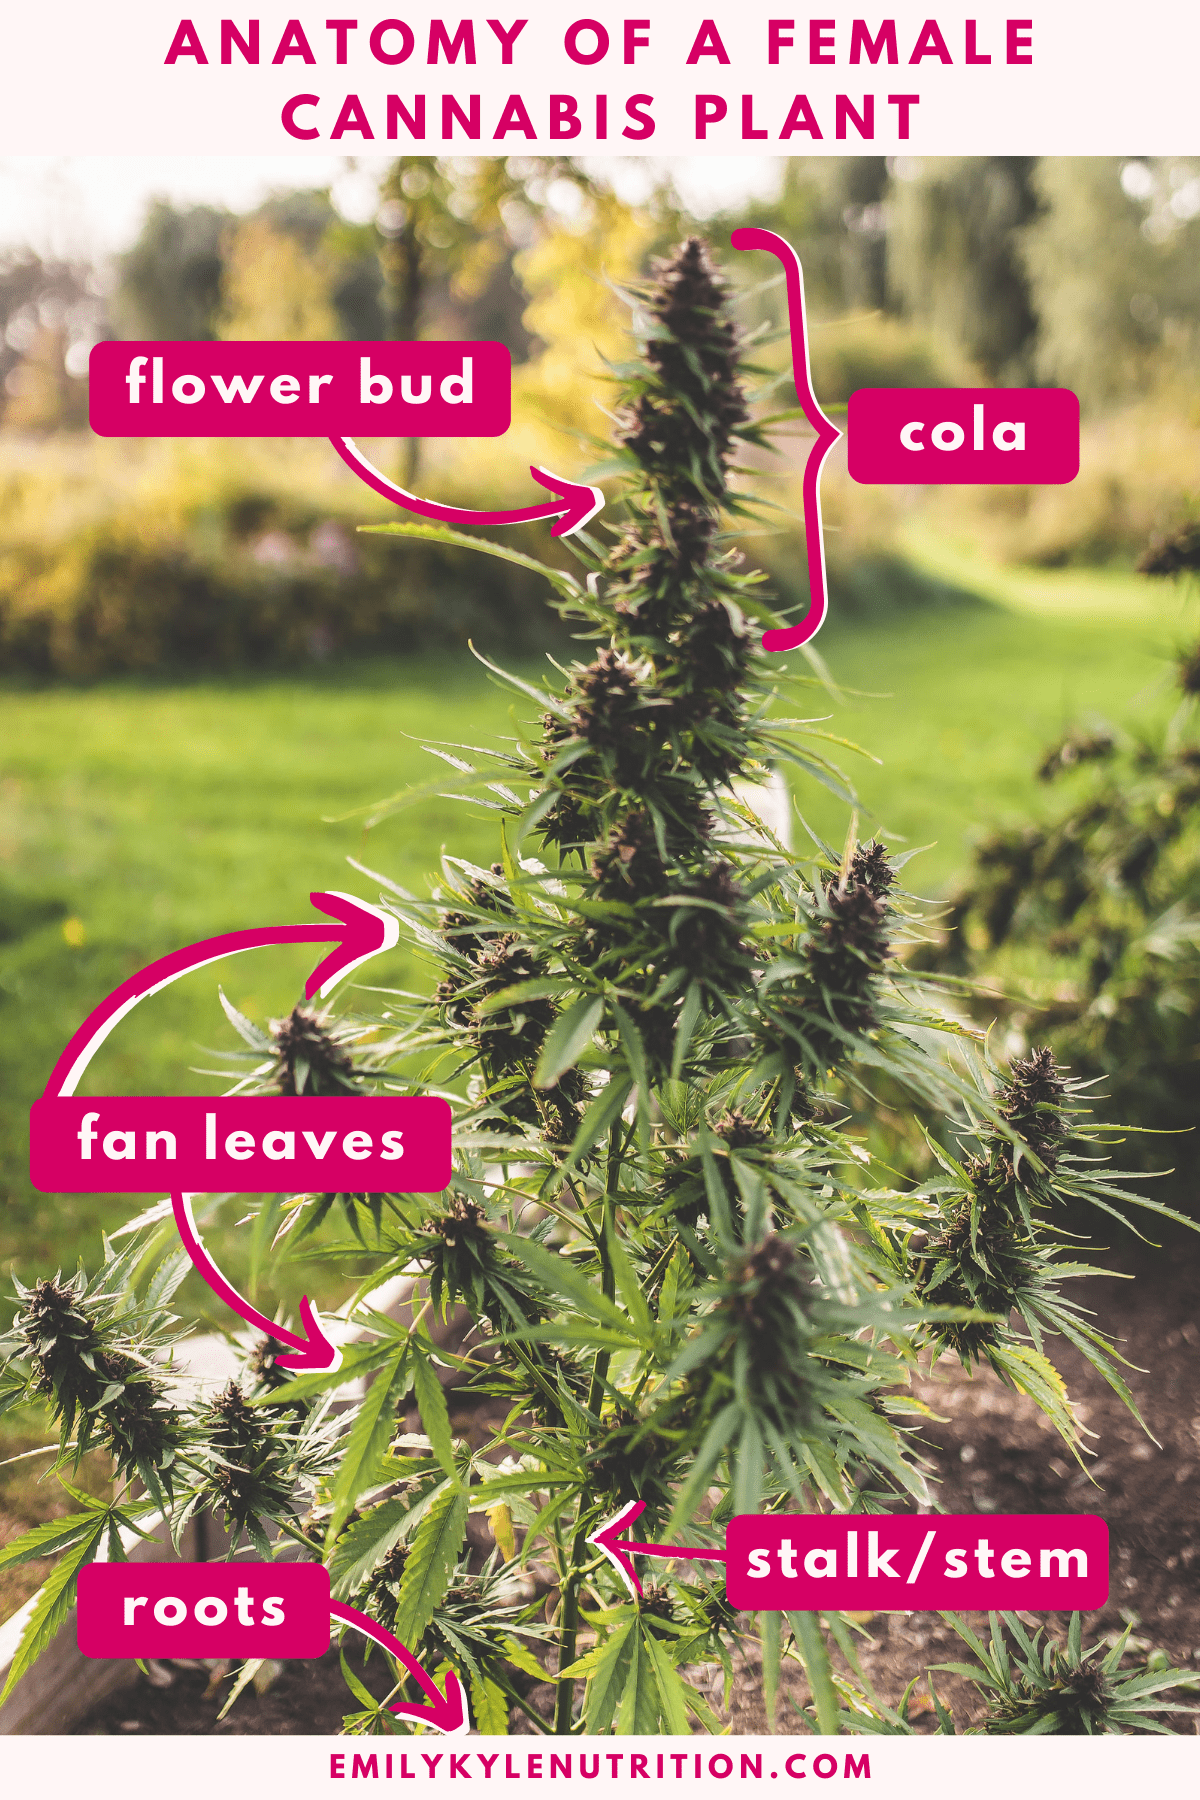 A picture of a cannabis plant growing in the ground with text labeling each part